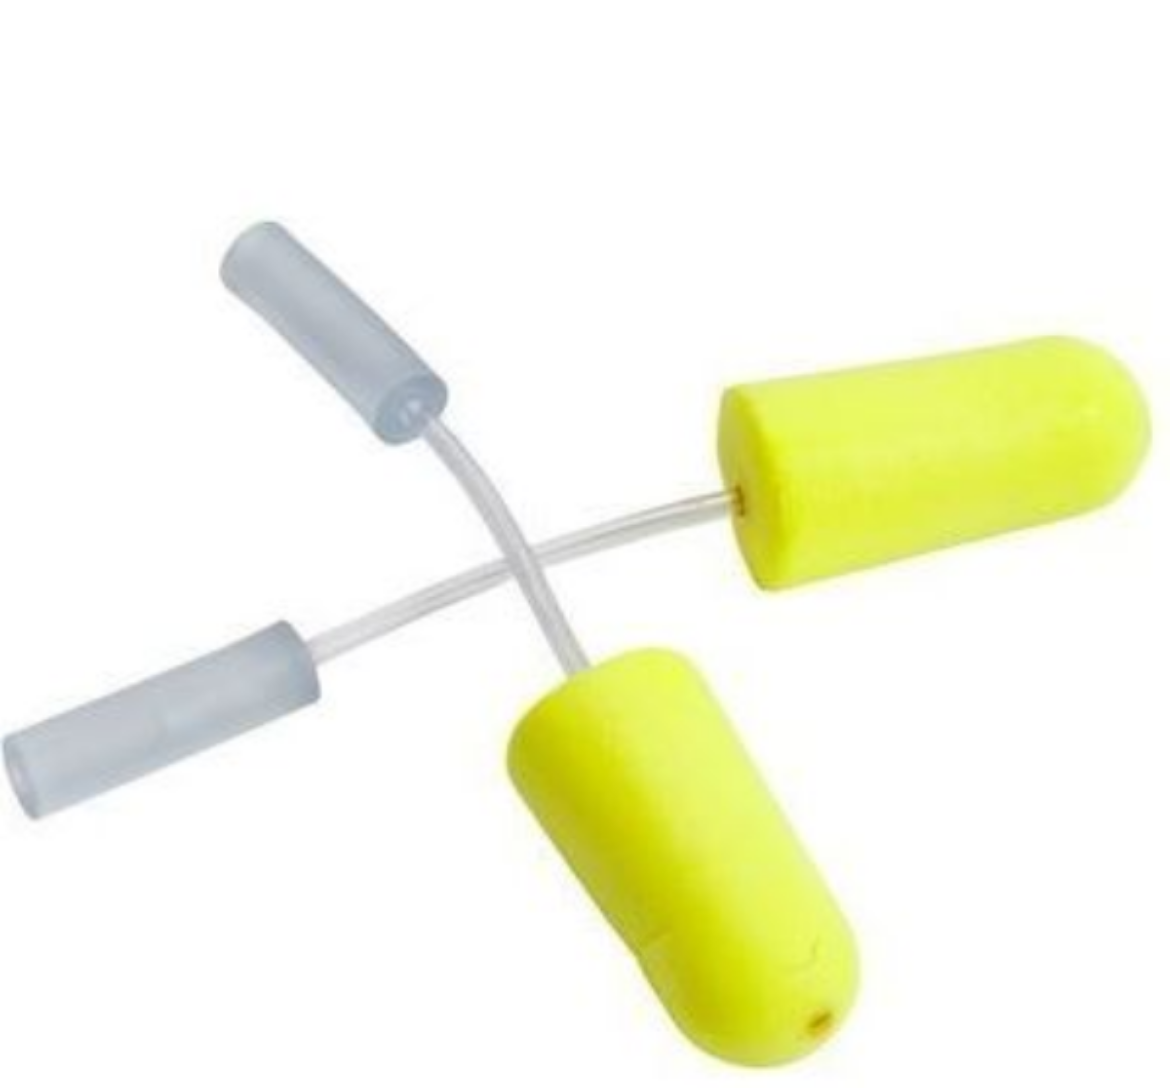 Picture of 393-2000-50 EARFIT™ VALIDATION TEST PLUGS YELLOW EARSOFT™ NEONS PROBED TEST EARPLUGS